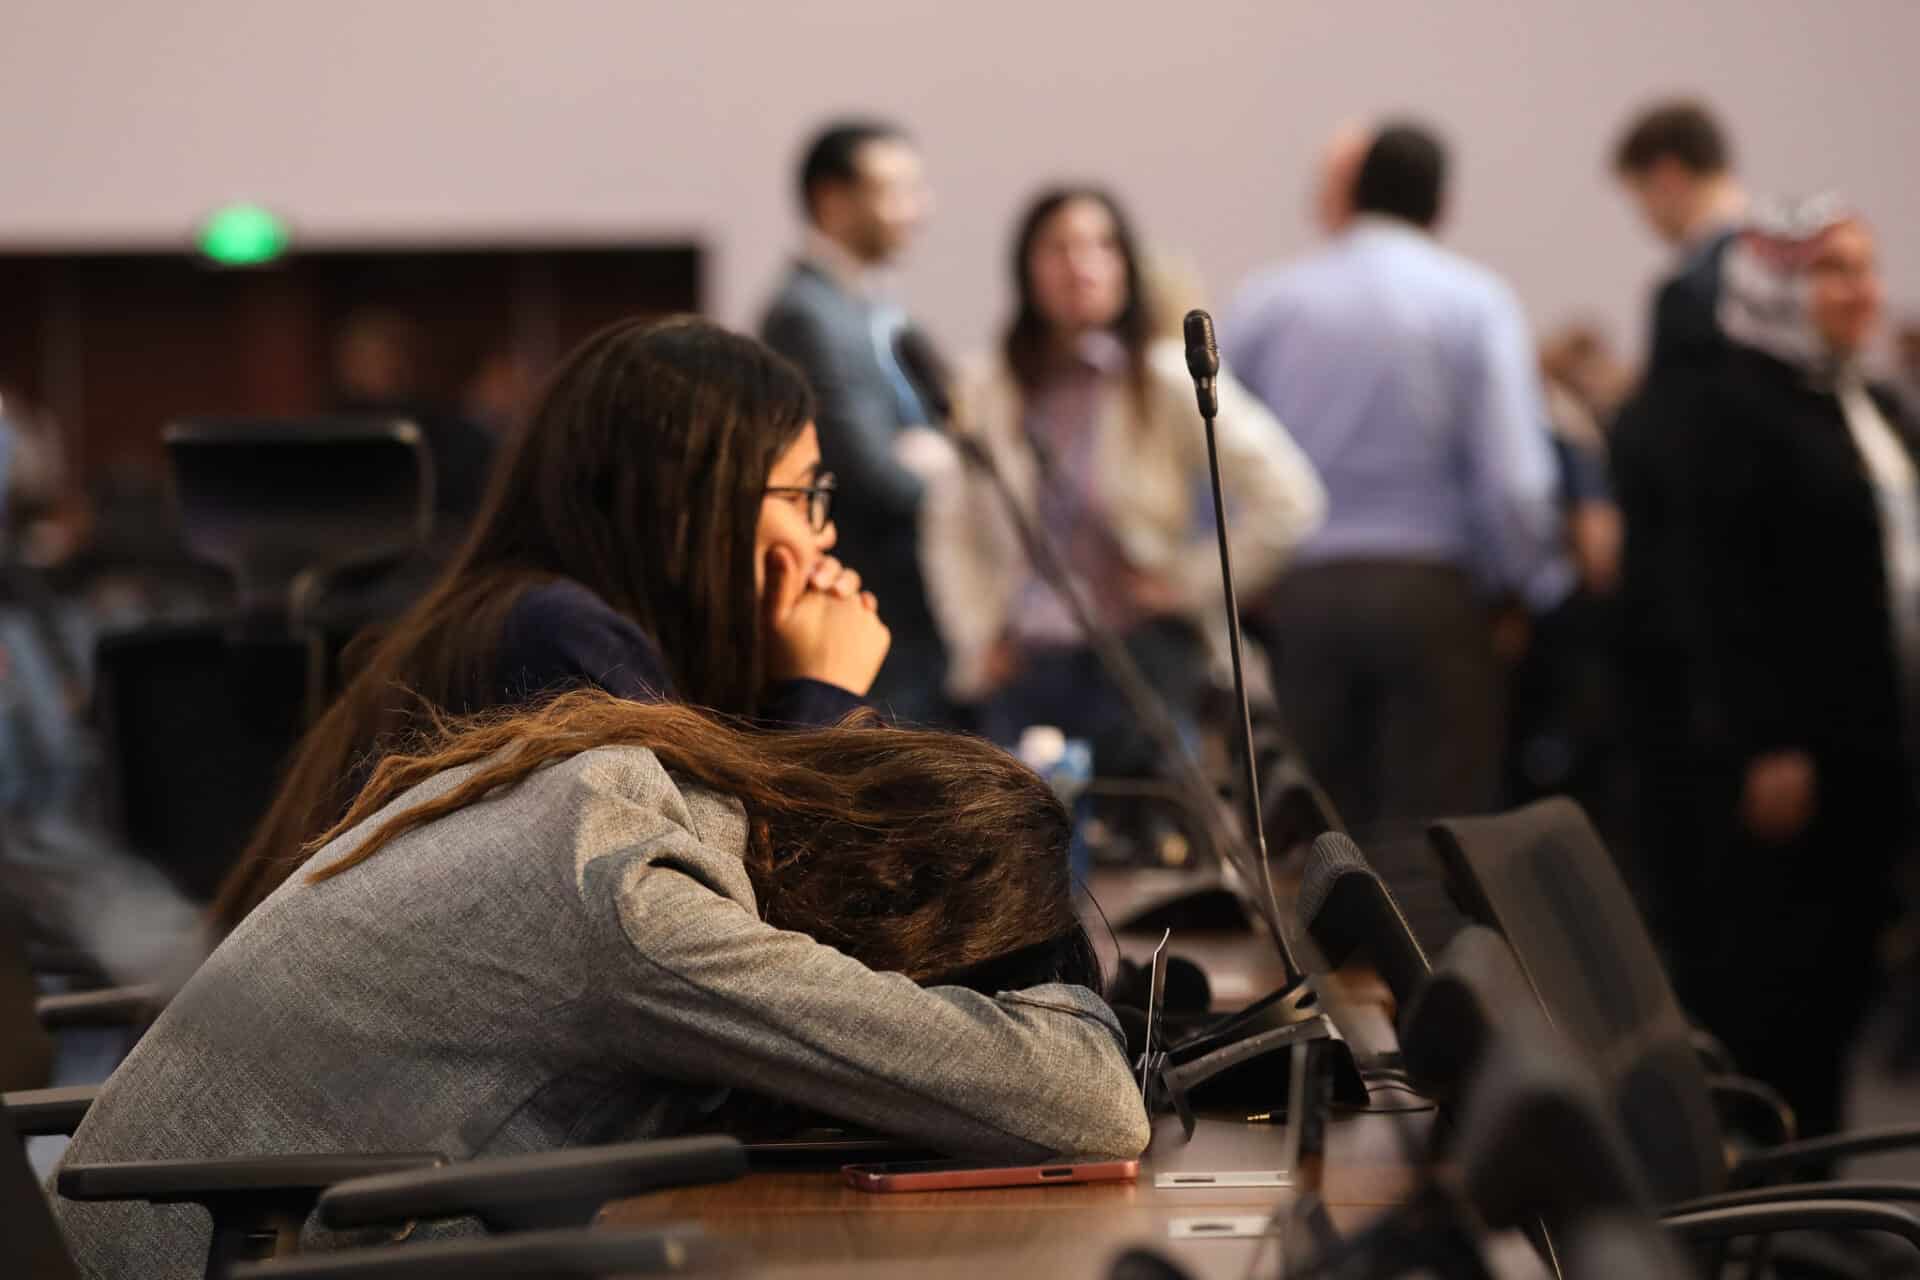 a conference attendee lays her head down on a table